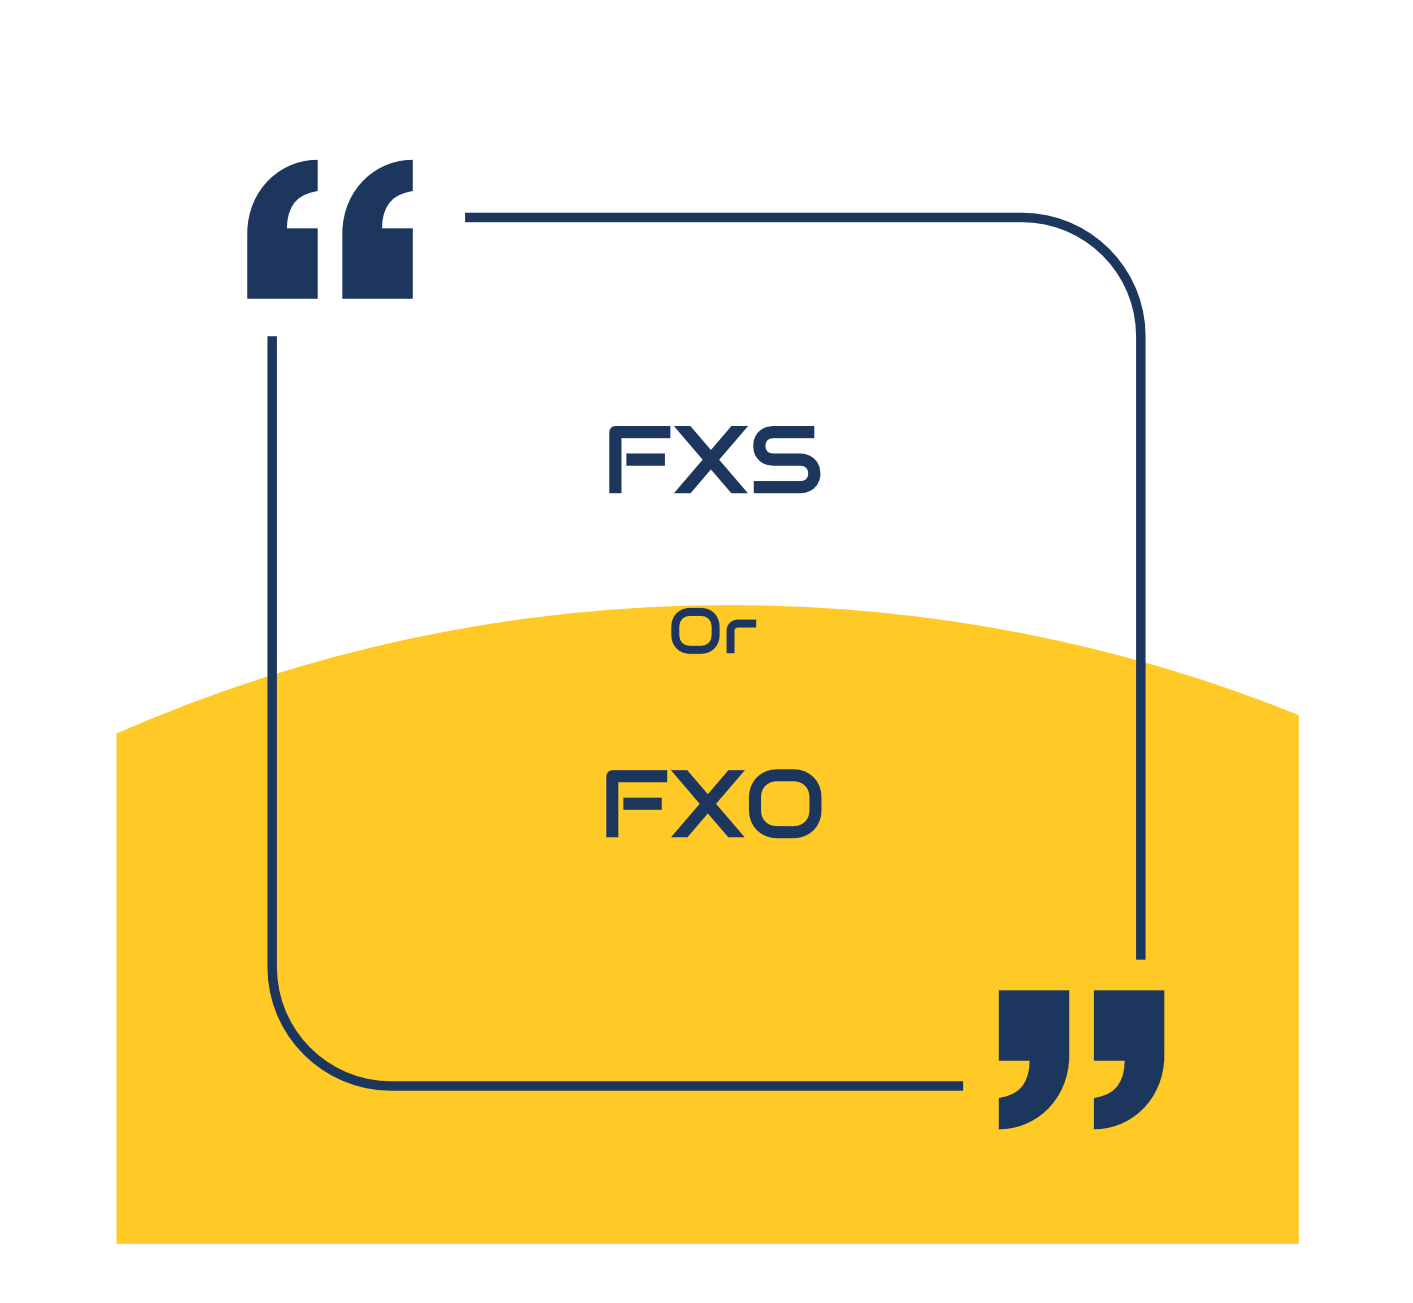 Do you need an FXS of FXO gateway ?